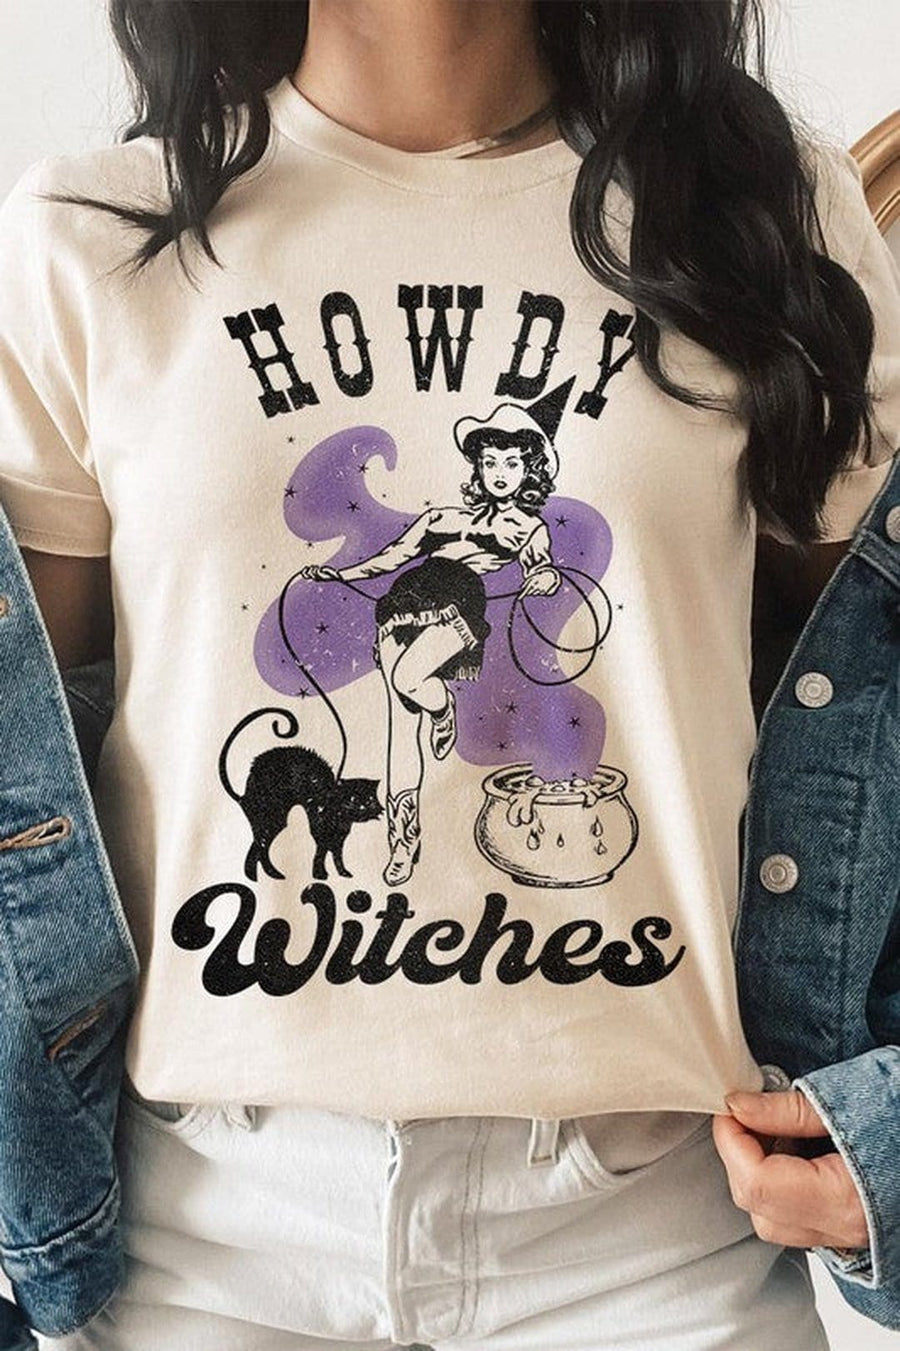 Howdy Witches Graphic T-Shirt